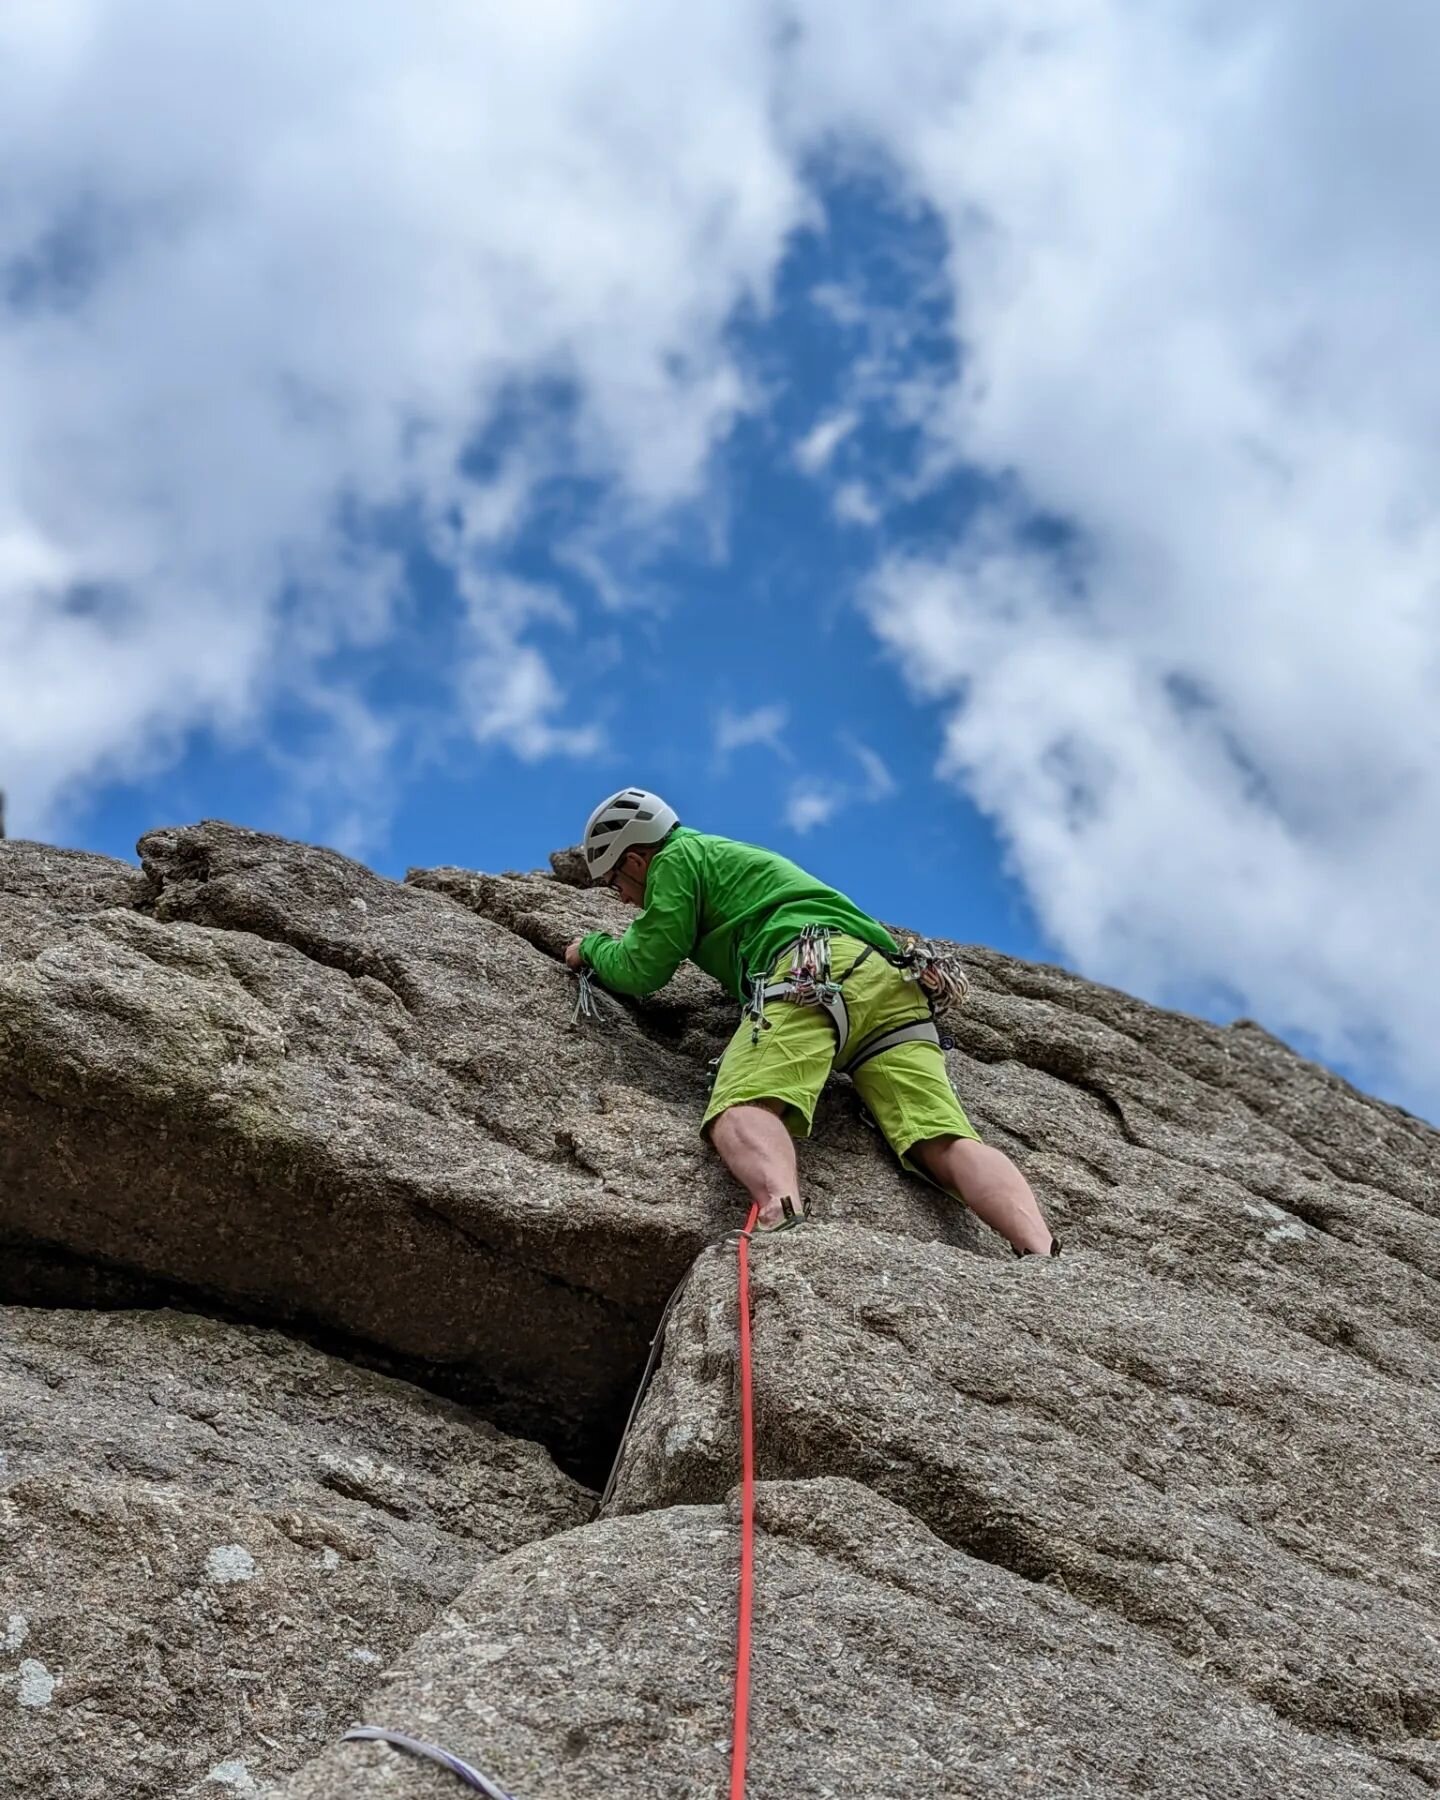 James joined us to refresh his lead climbing skills, we spent half the day at Hound Tor and the second half at Haytor

#climbdevon #climbing #rockclimbing #climb #climbinglife #climber #nature #adventure #sportclimbing #rockclimber #tradclimbing #out